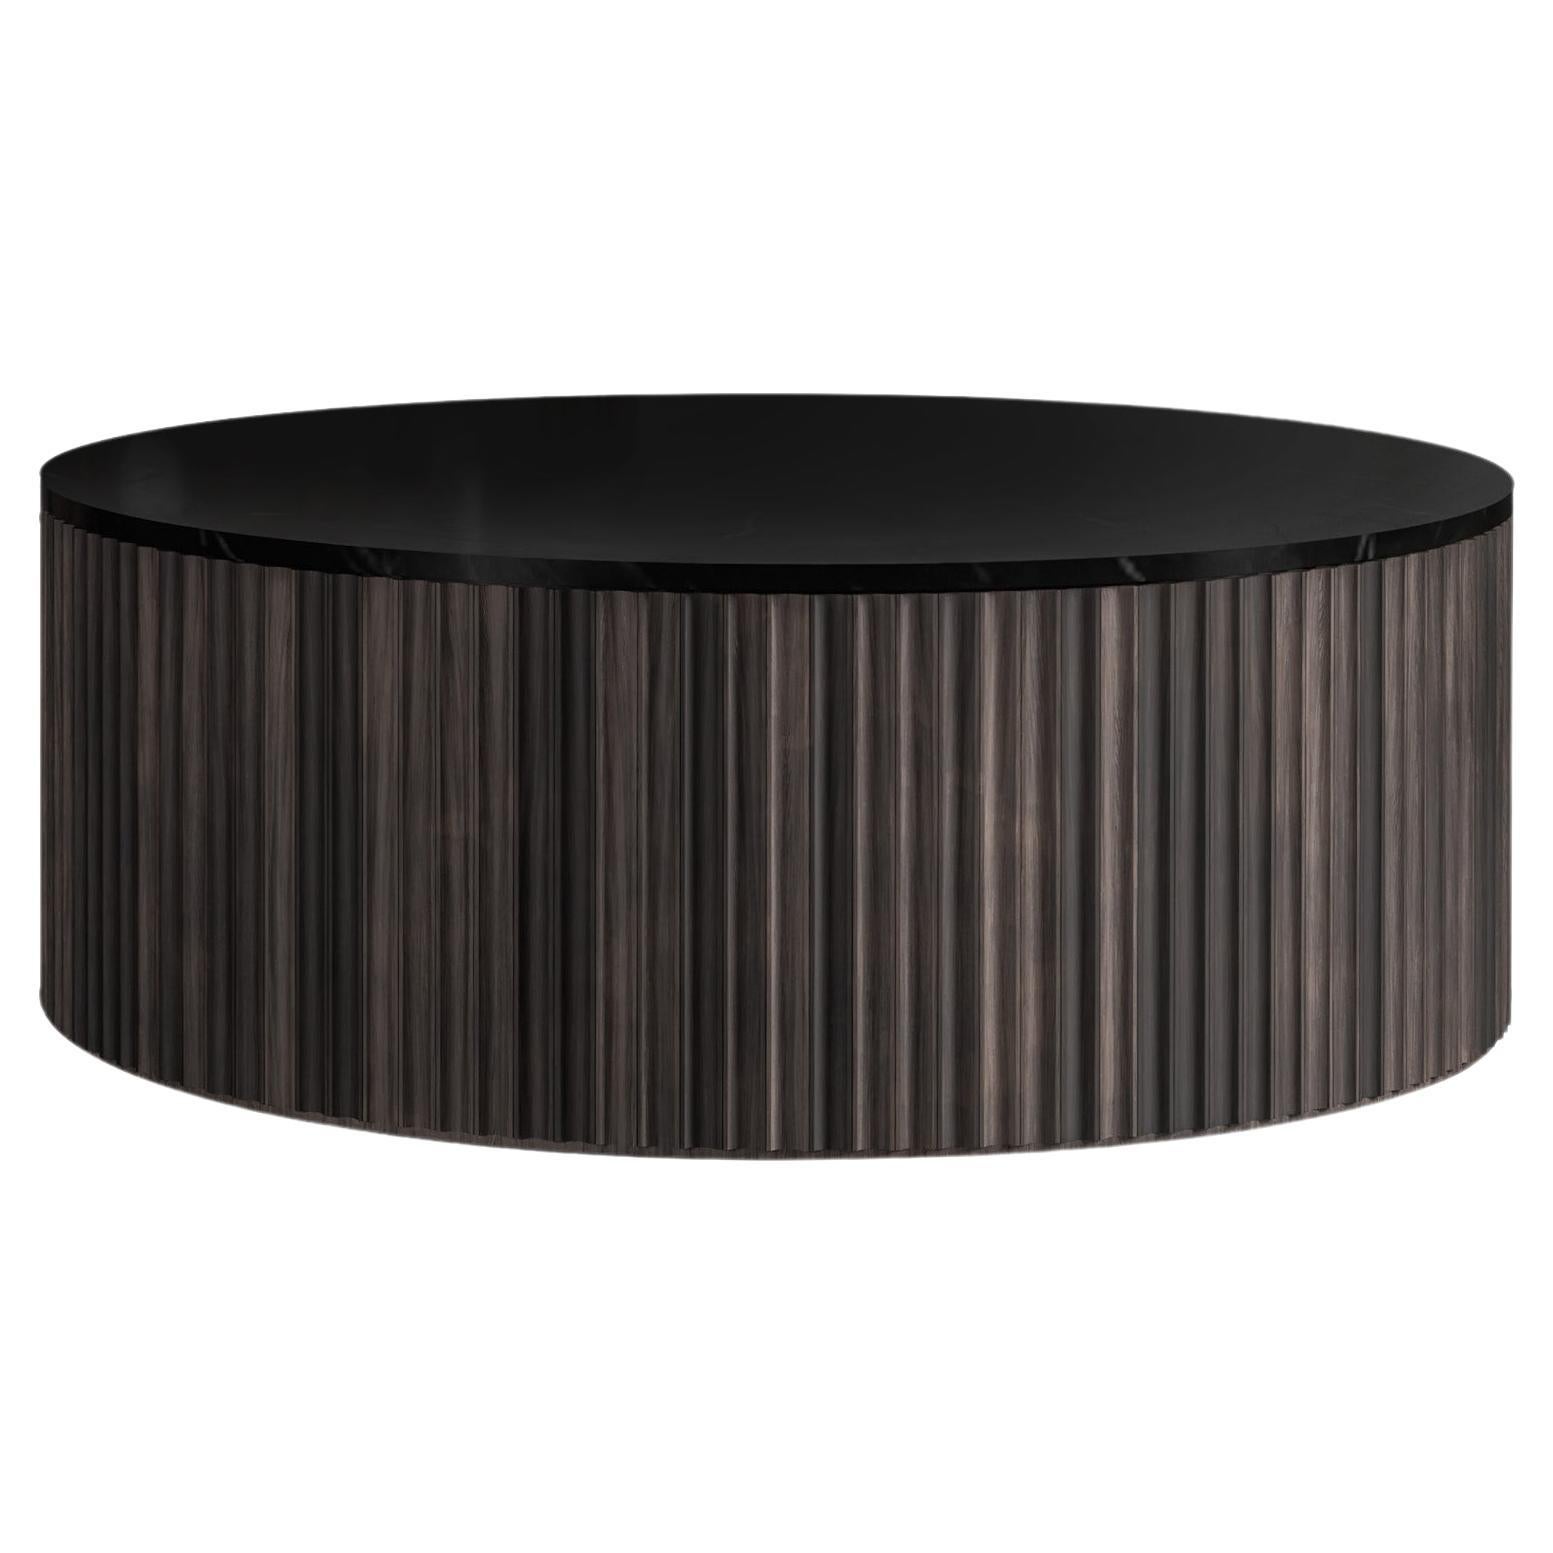 Pilar Round Coffee Table / Oxidized Oak Wood, Nero Marquina Marble Top by INDO-